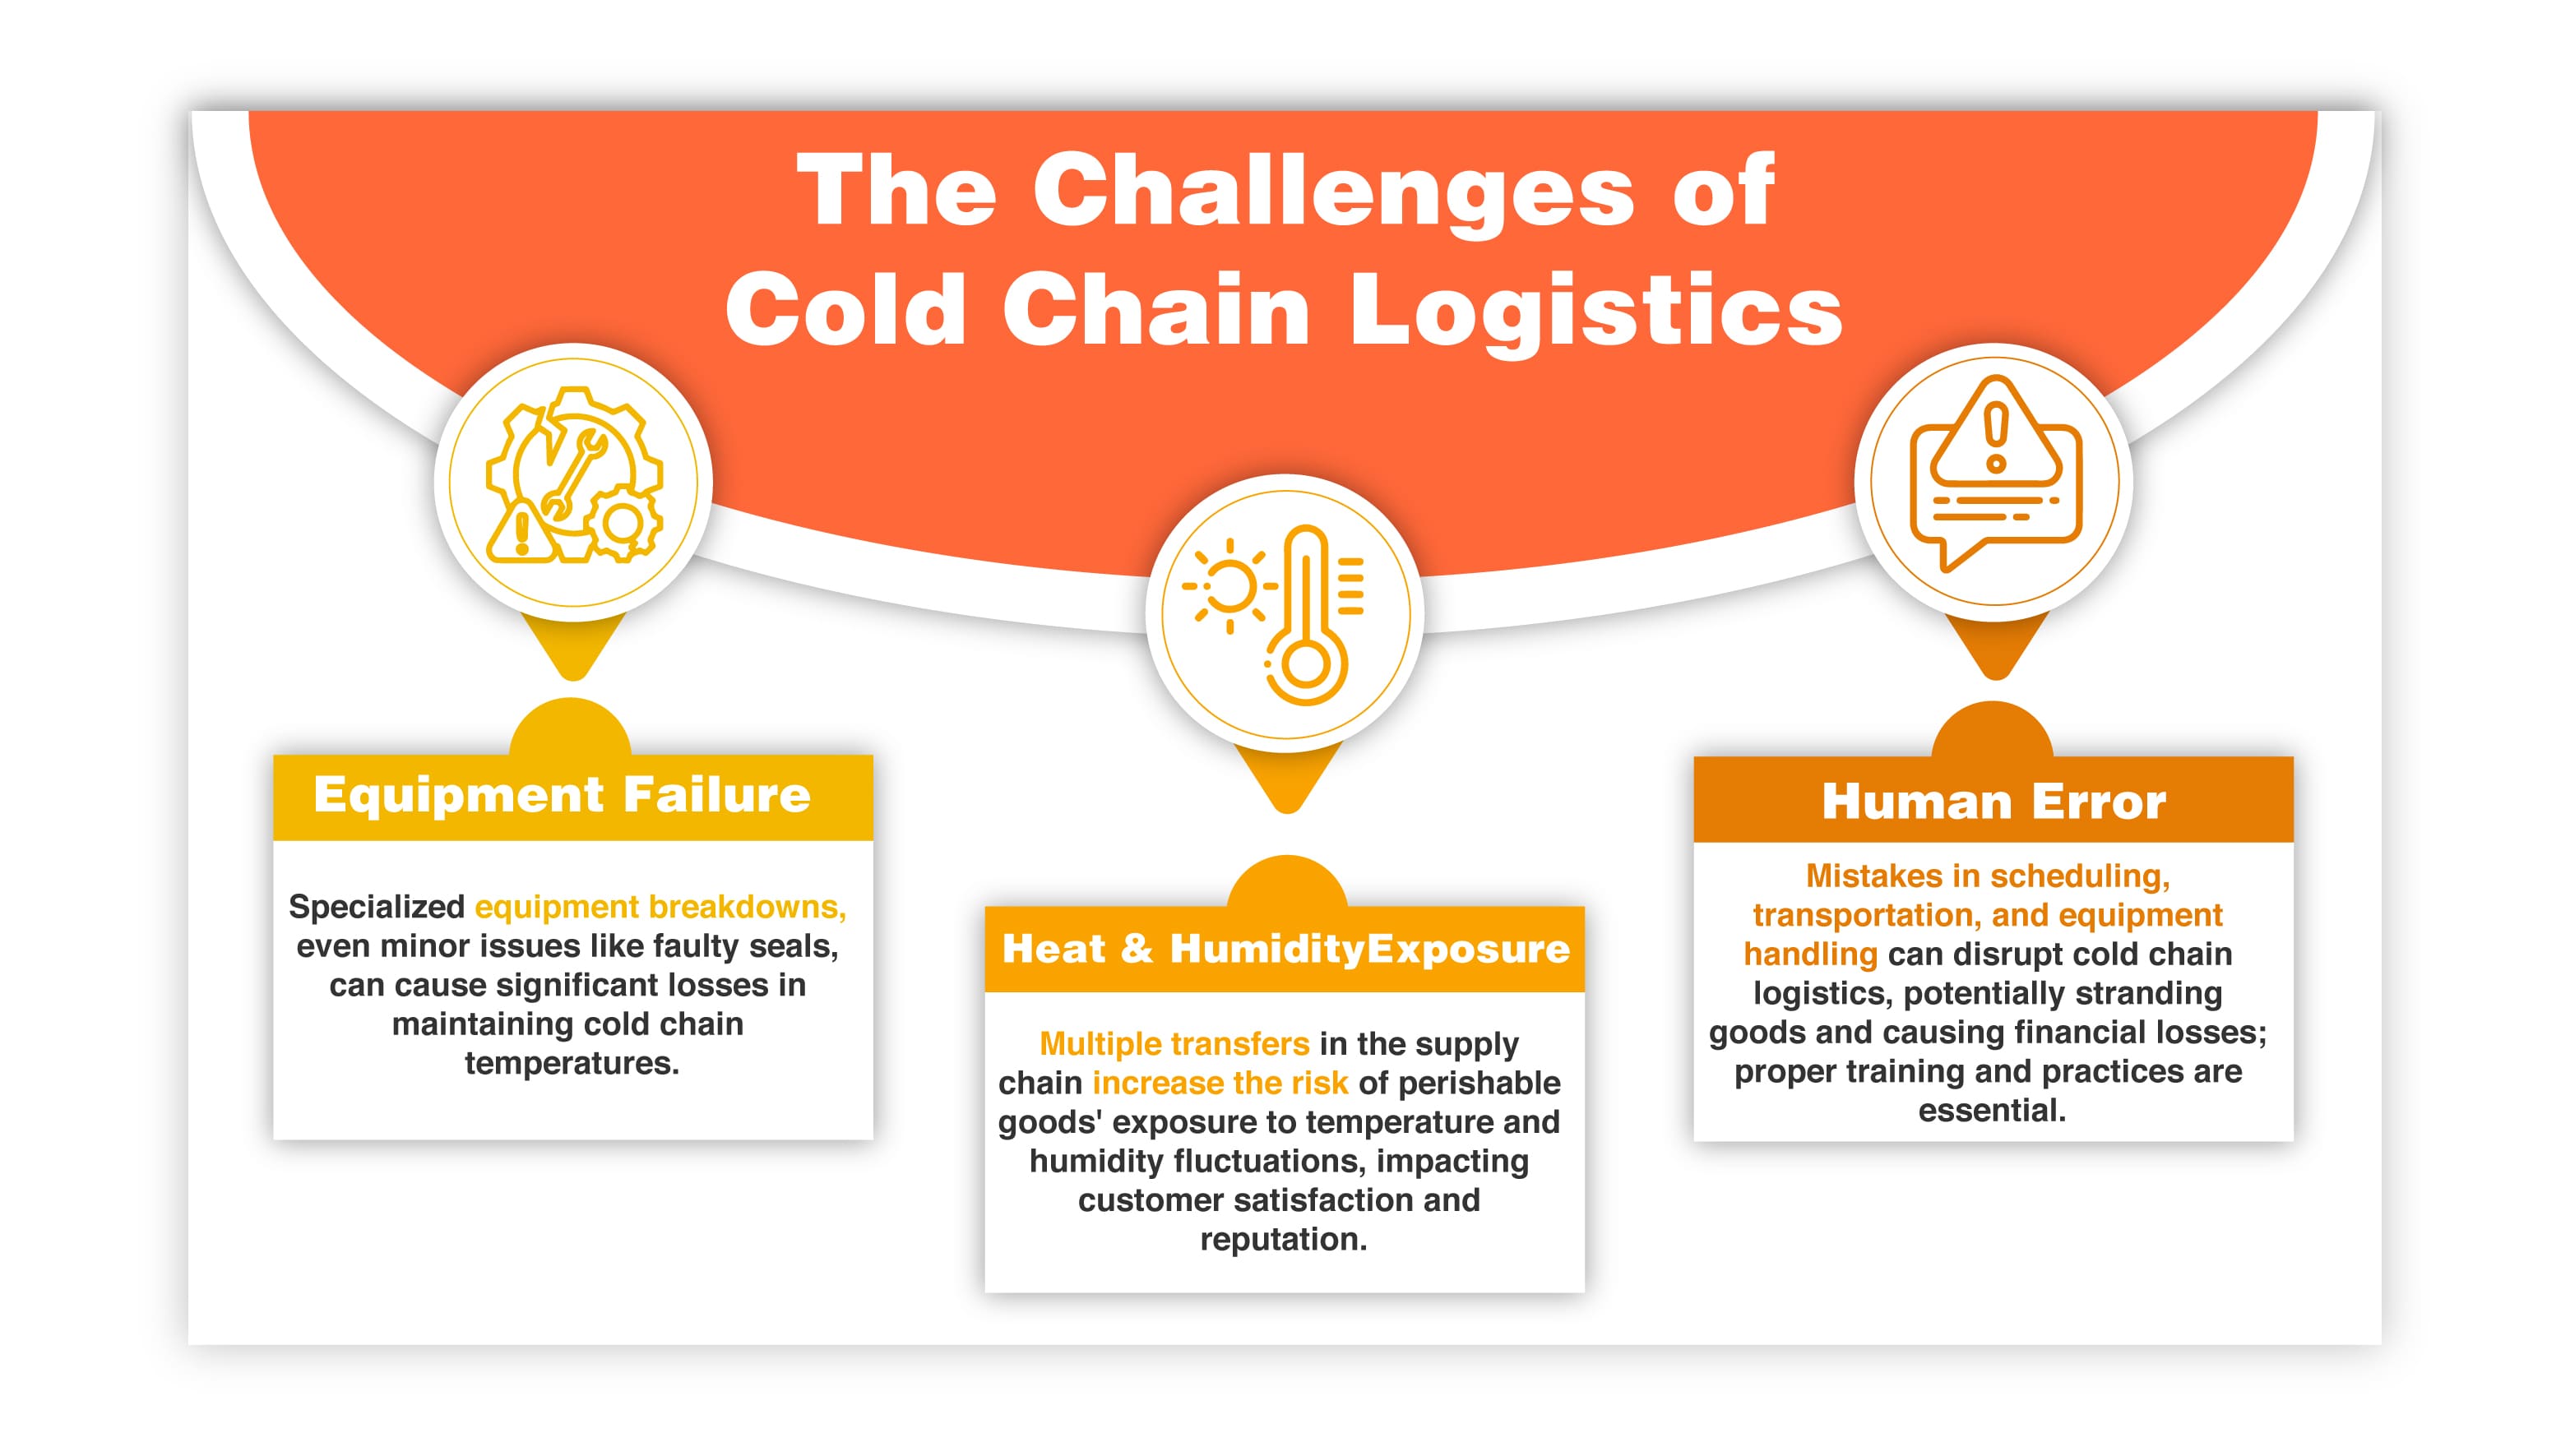 3 The Challenges of Cold Chain Logistics